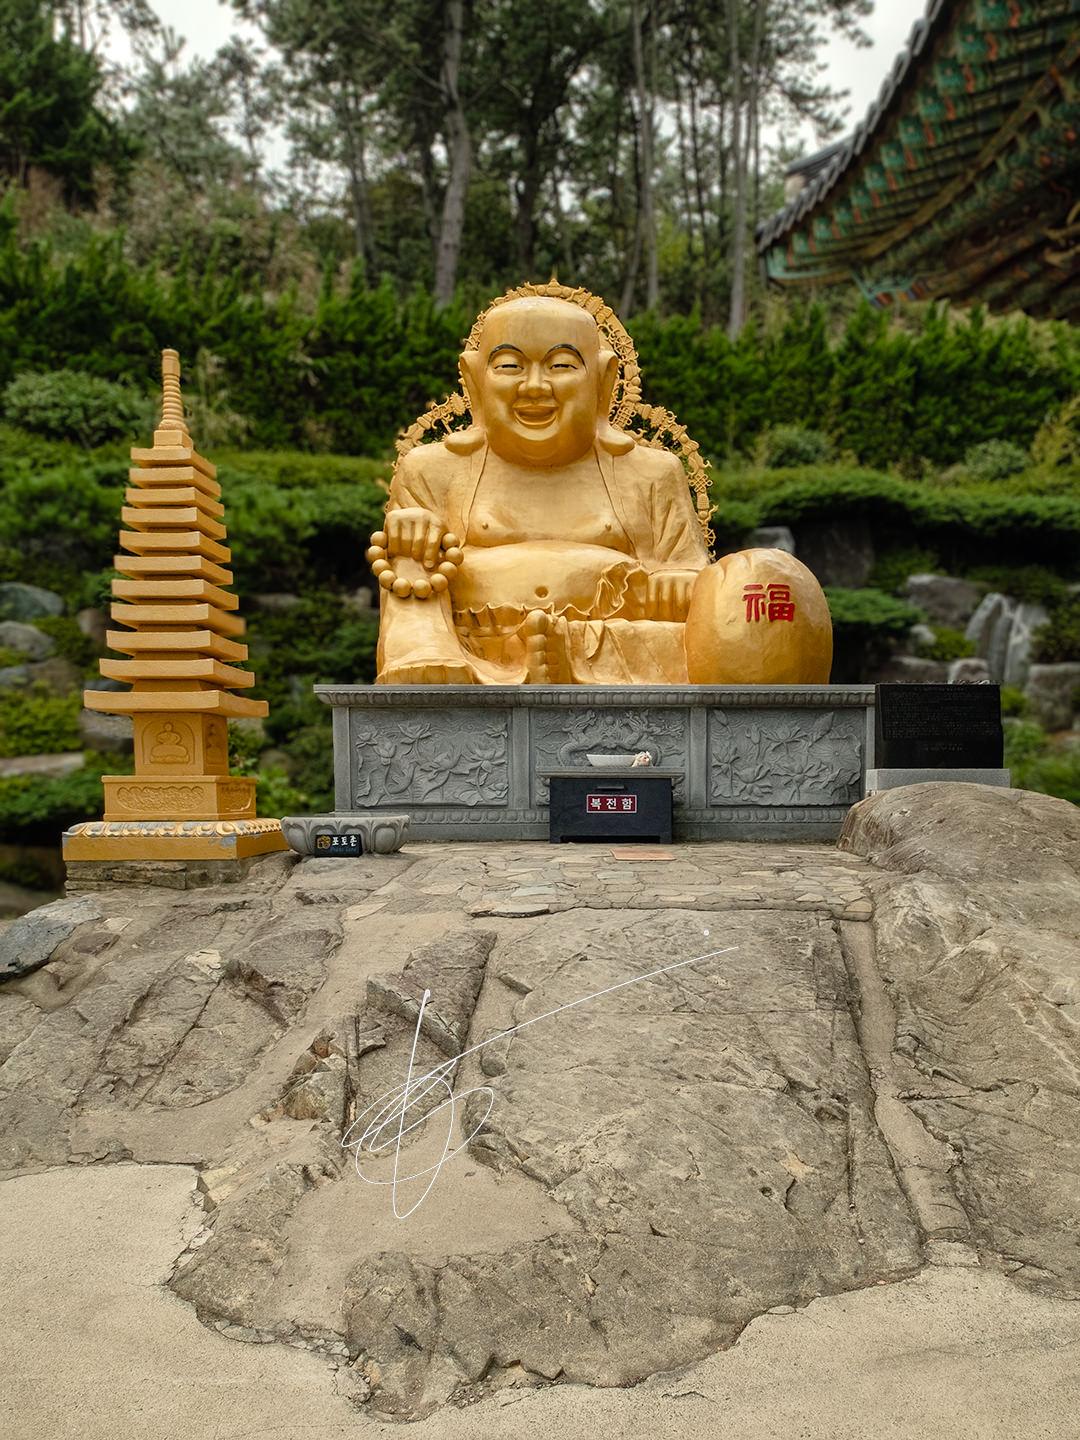 A golden statue of Buddha in the coastline temple of Busan